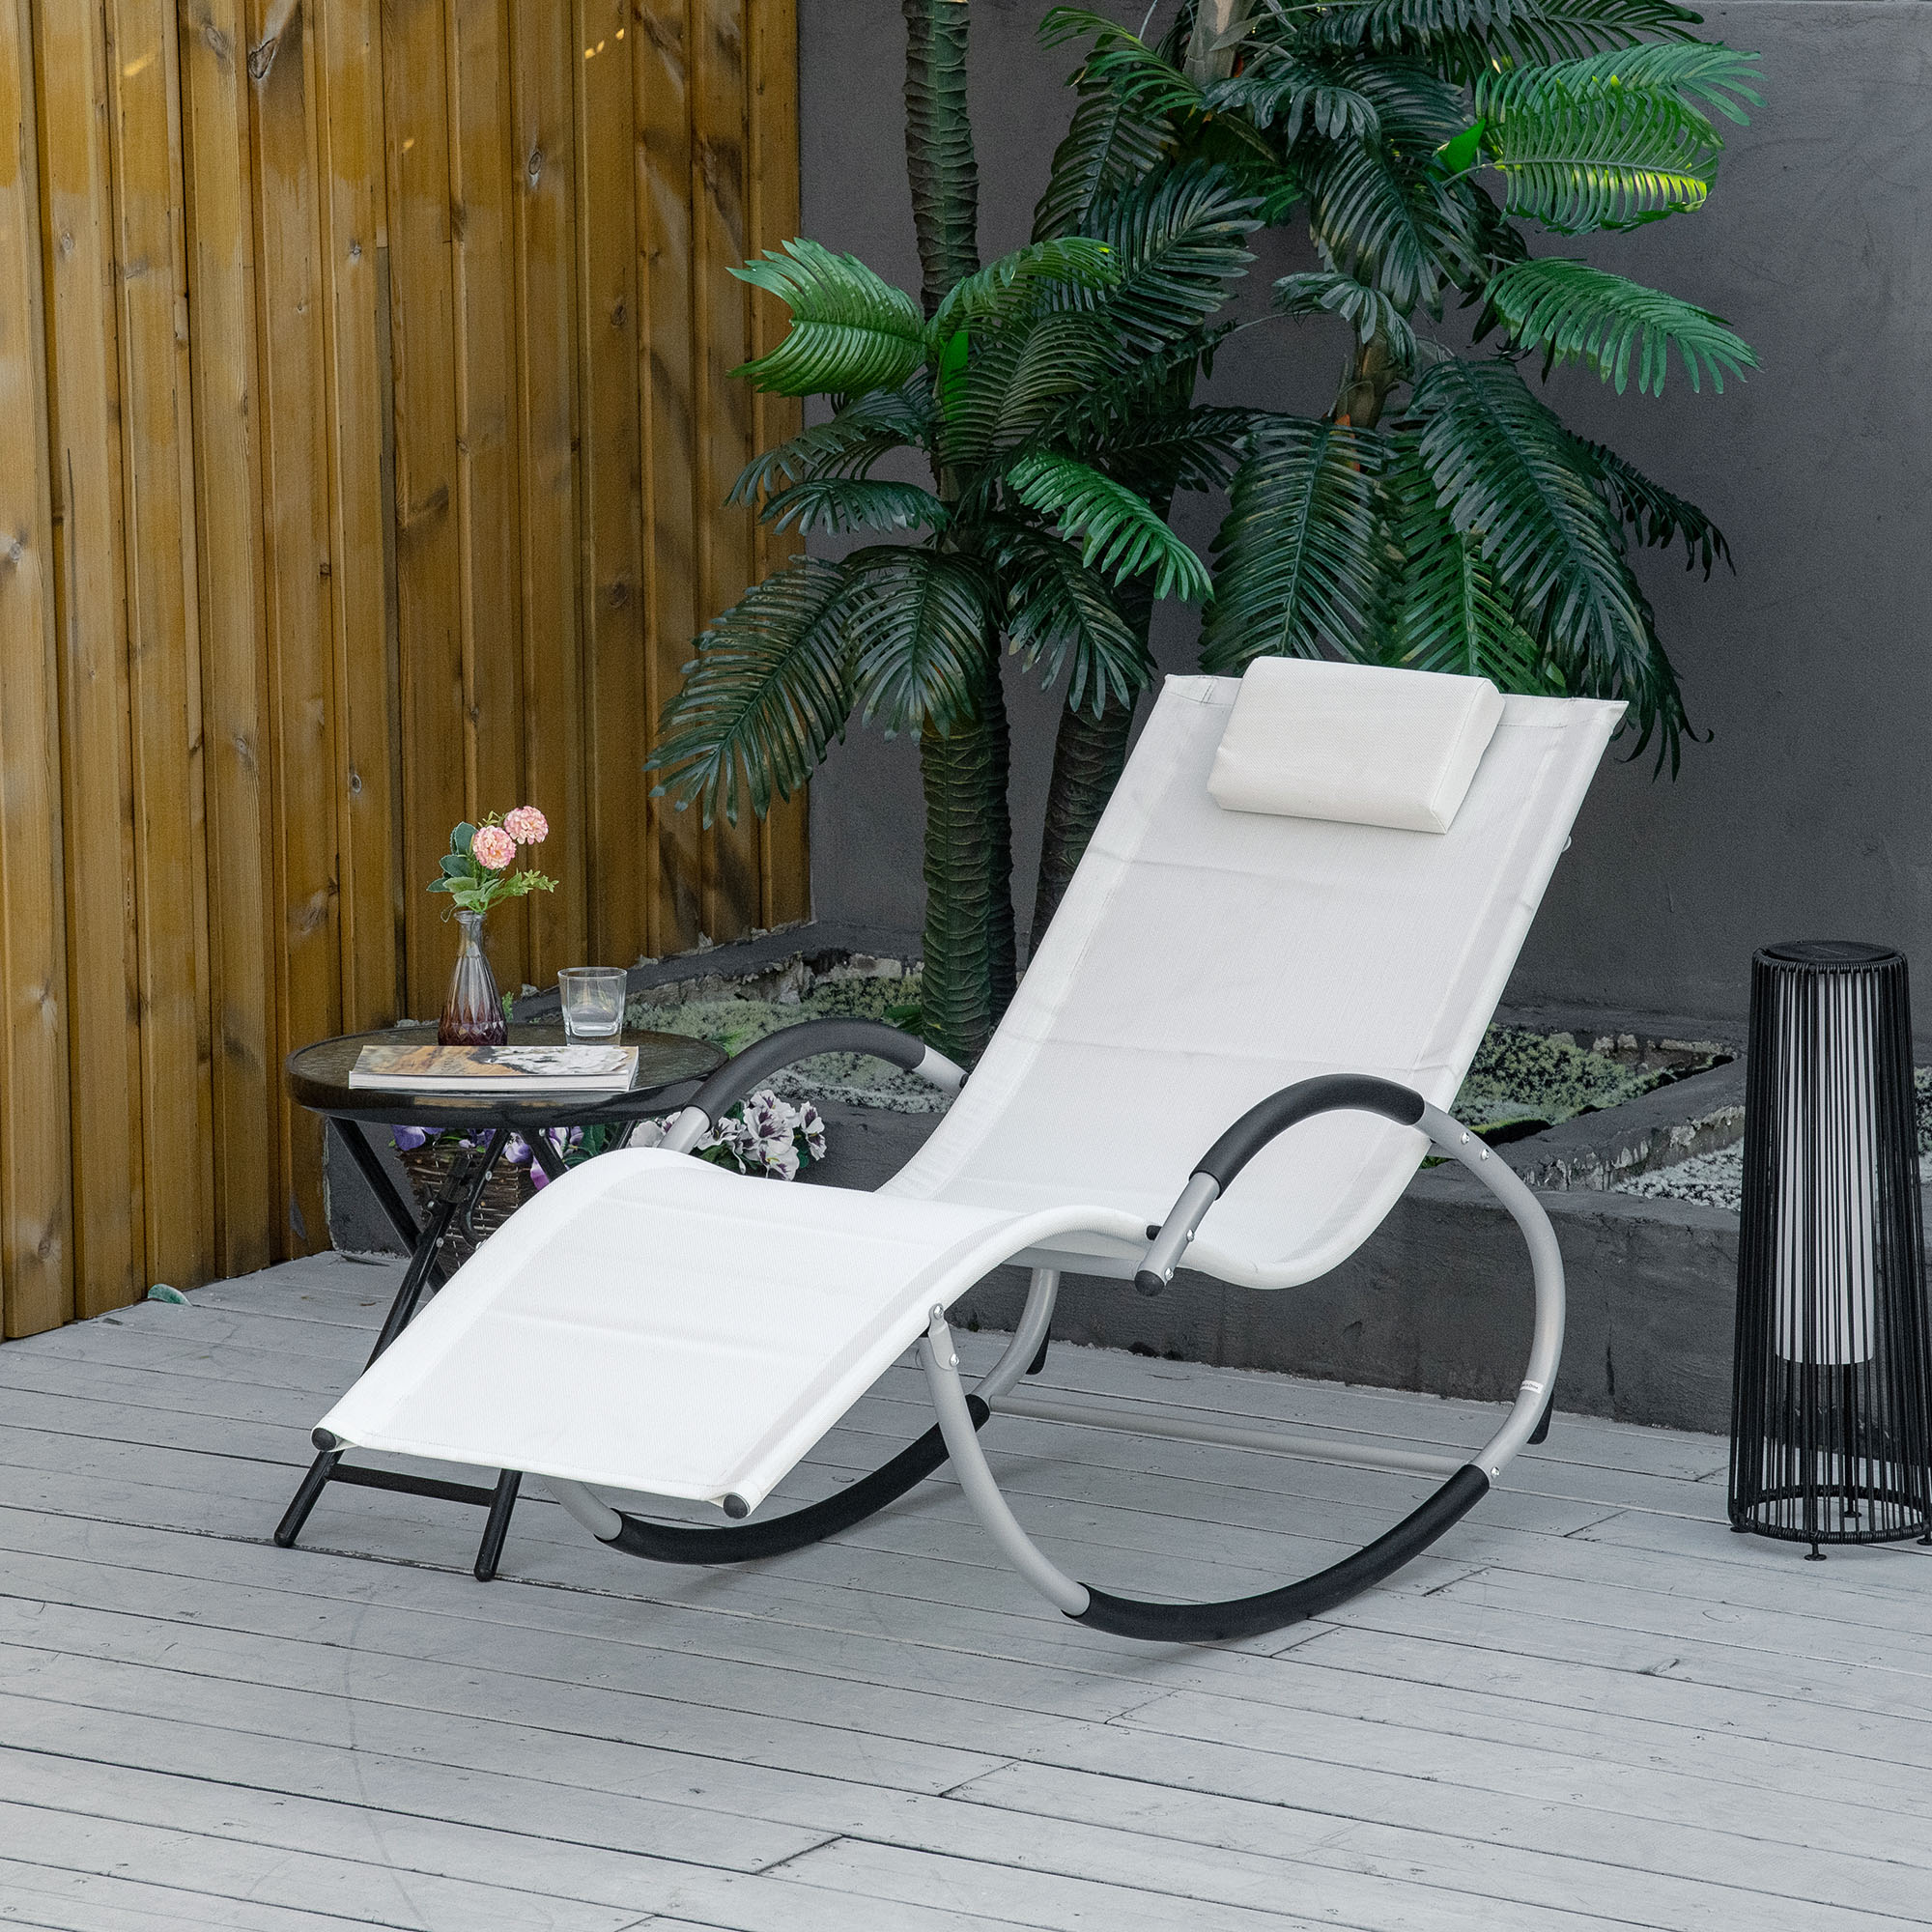 Outsunny Pool Lounge Outdoor Rocking Chair, Pillow, White - image 2 of 9